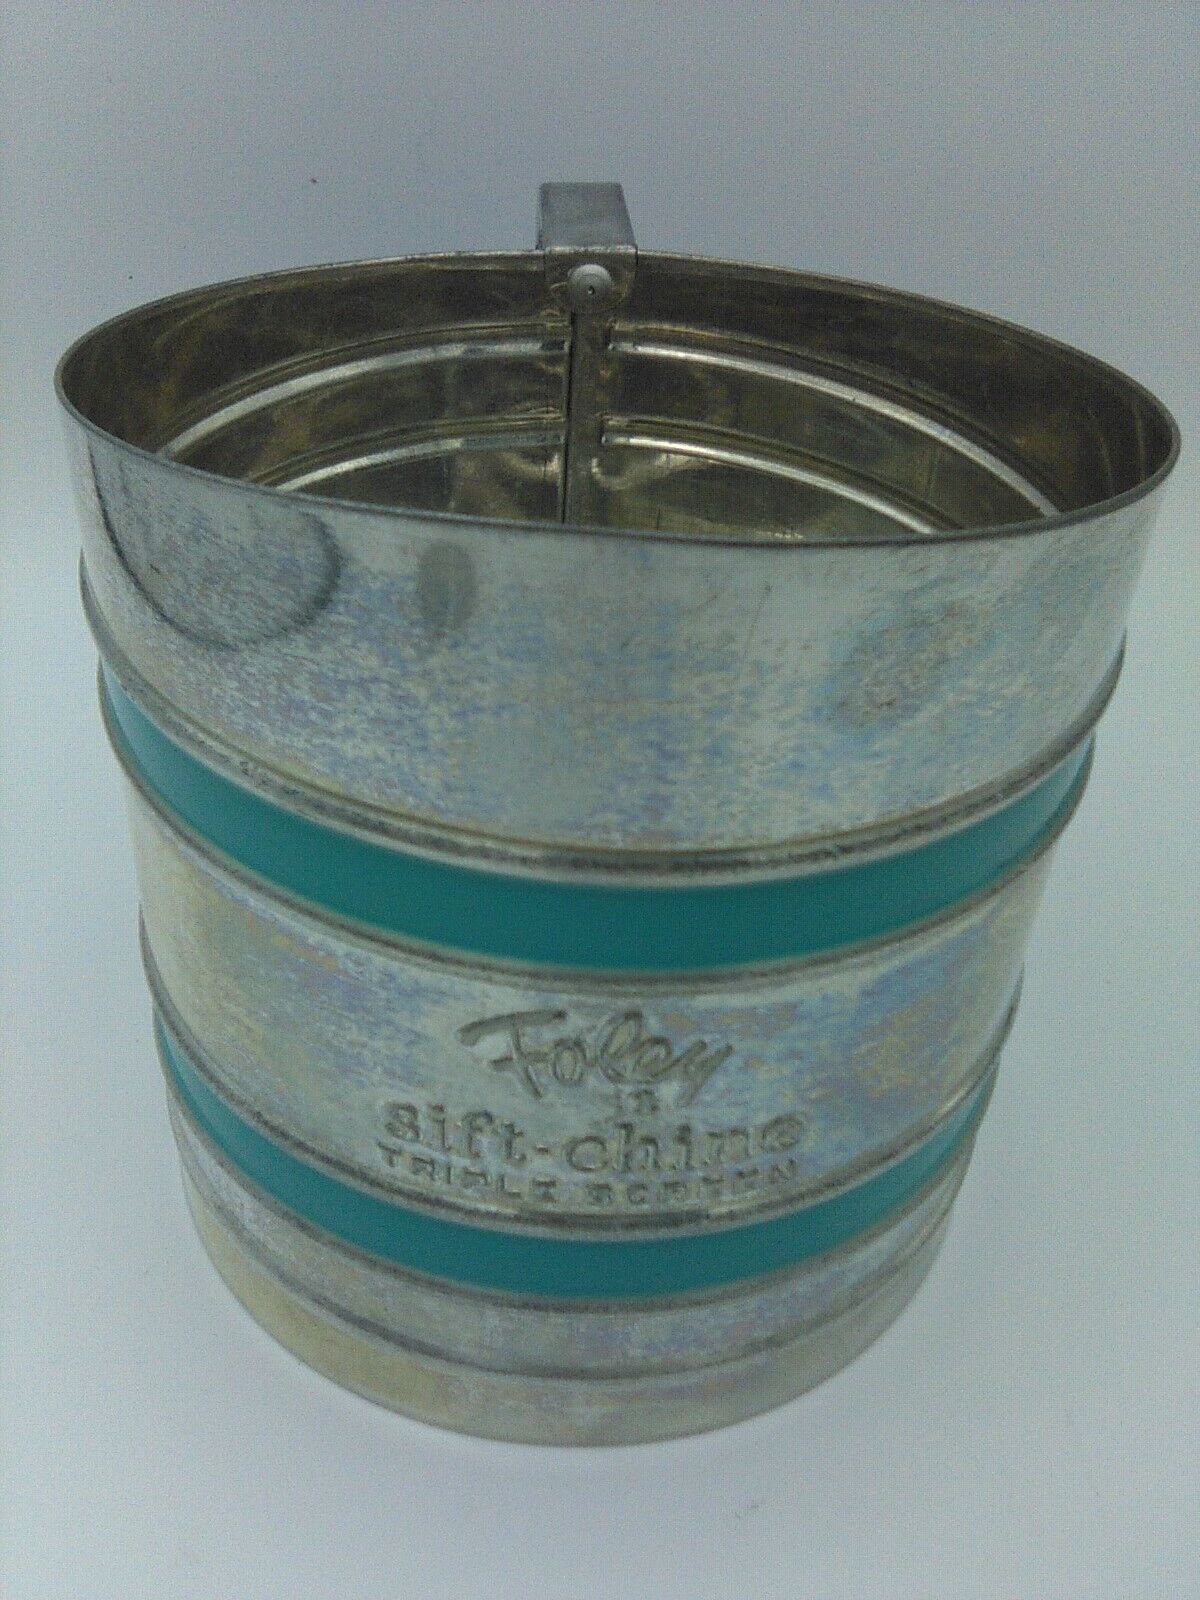 Rare Foley Sift-Shine triple Screen Metal Flour Sifter w/ Blue Turquoise band. 